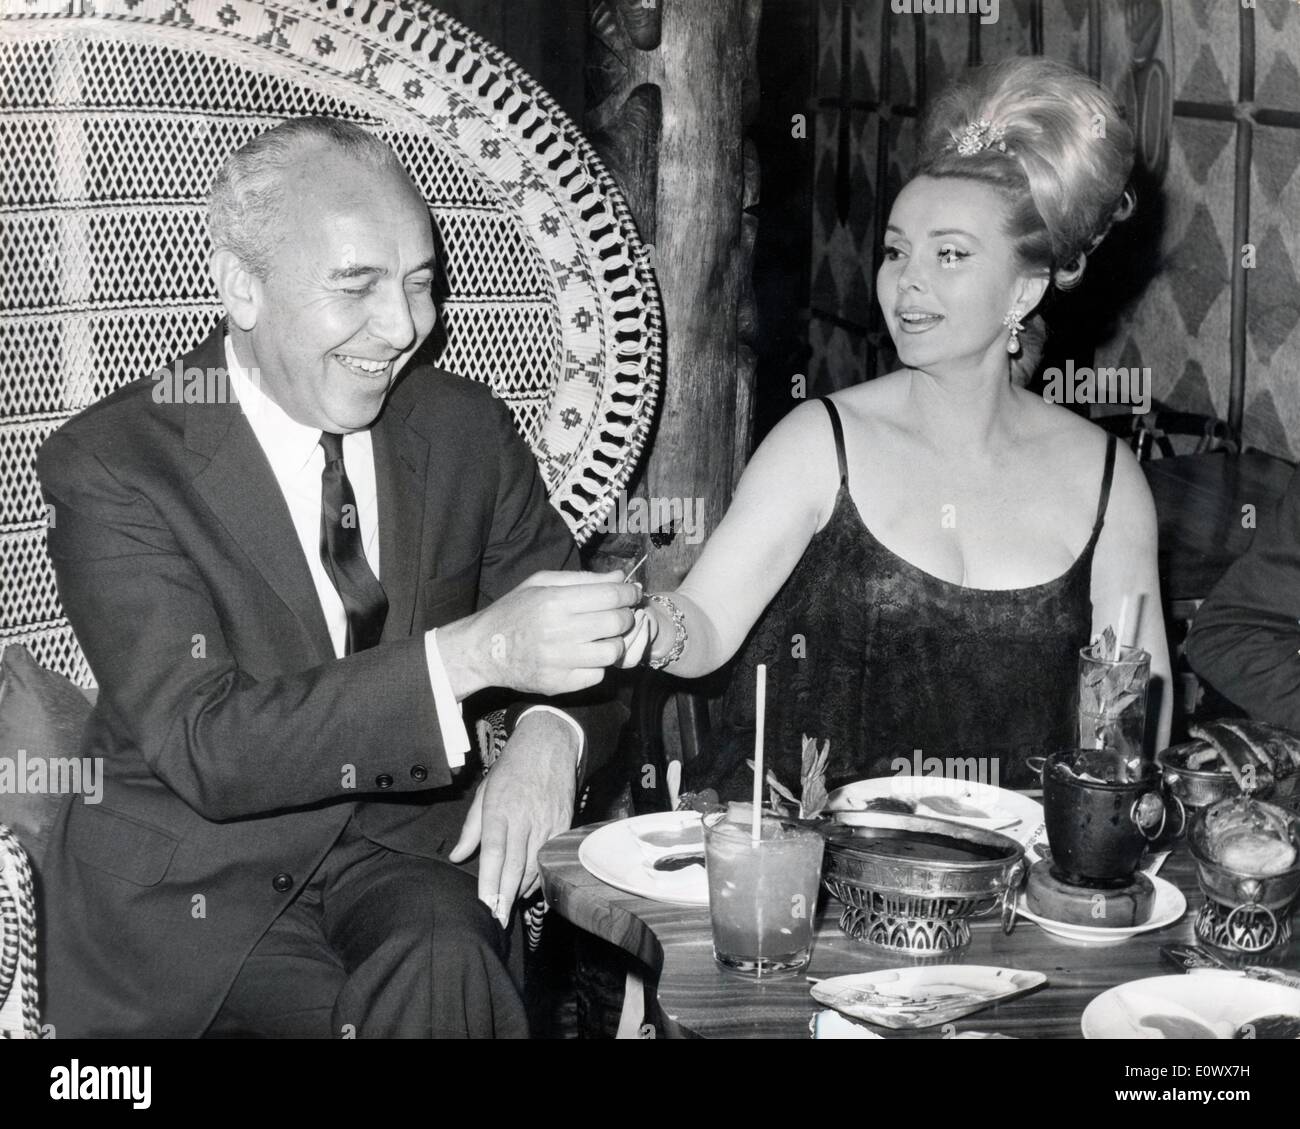 Zsa Zsa Gabor with her husband Herbert Hunter at a dinner at the Stock  Photo - Alamy